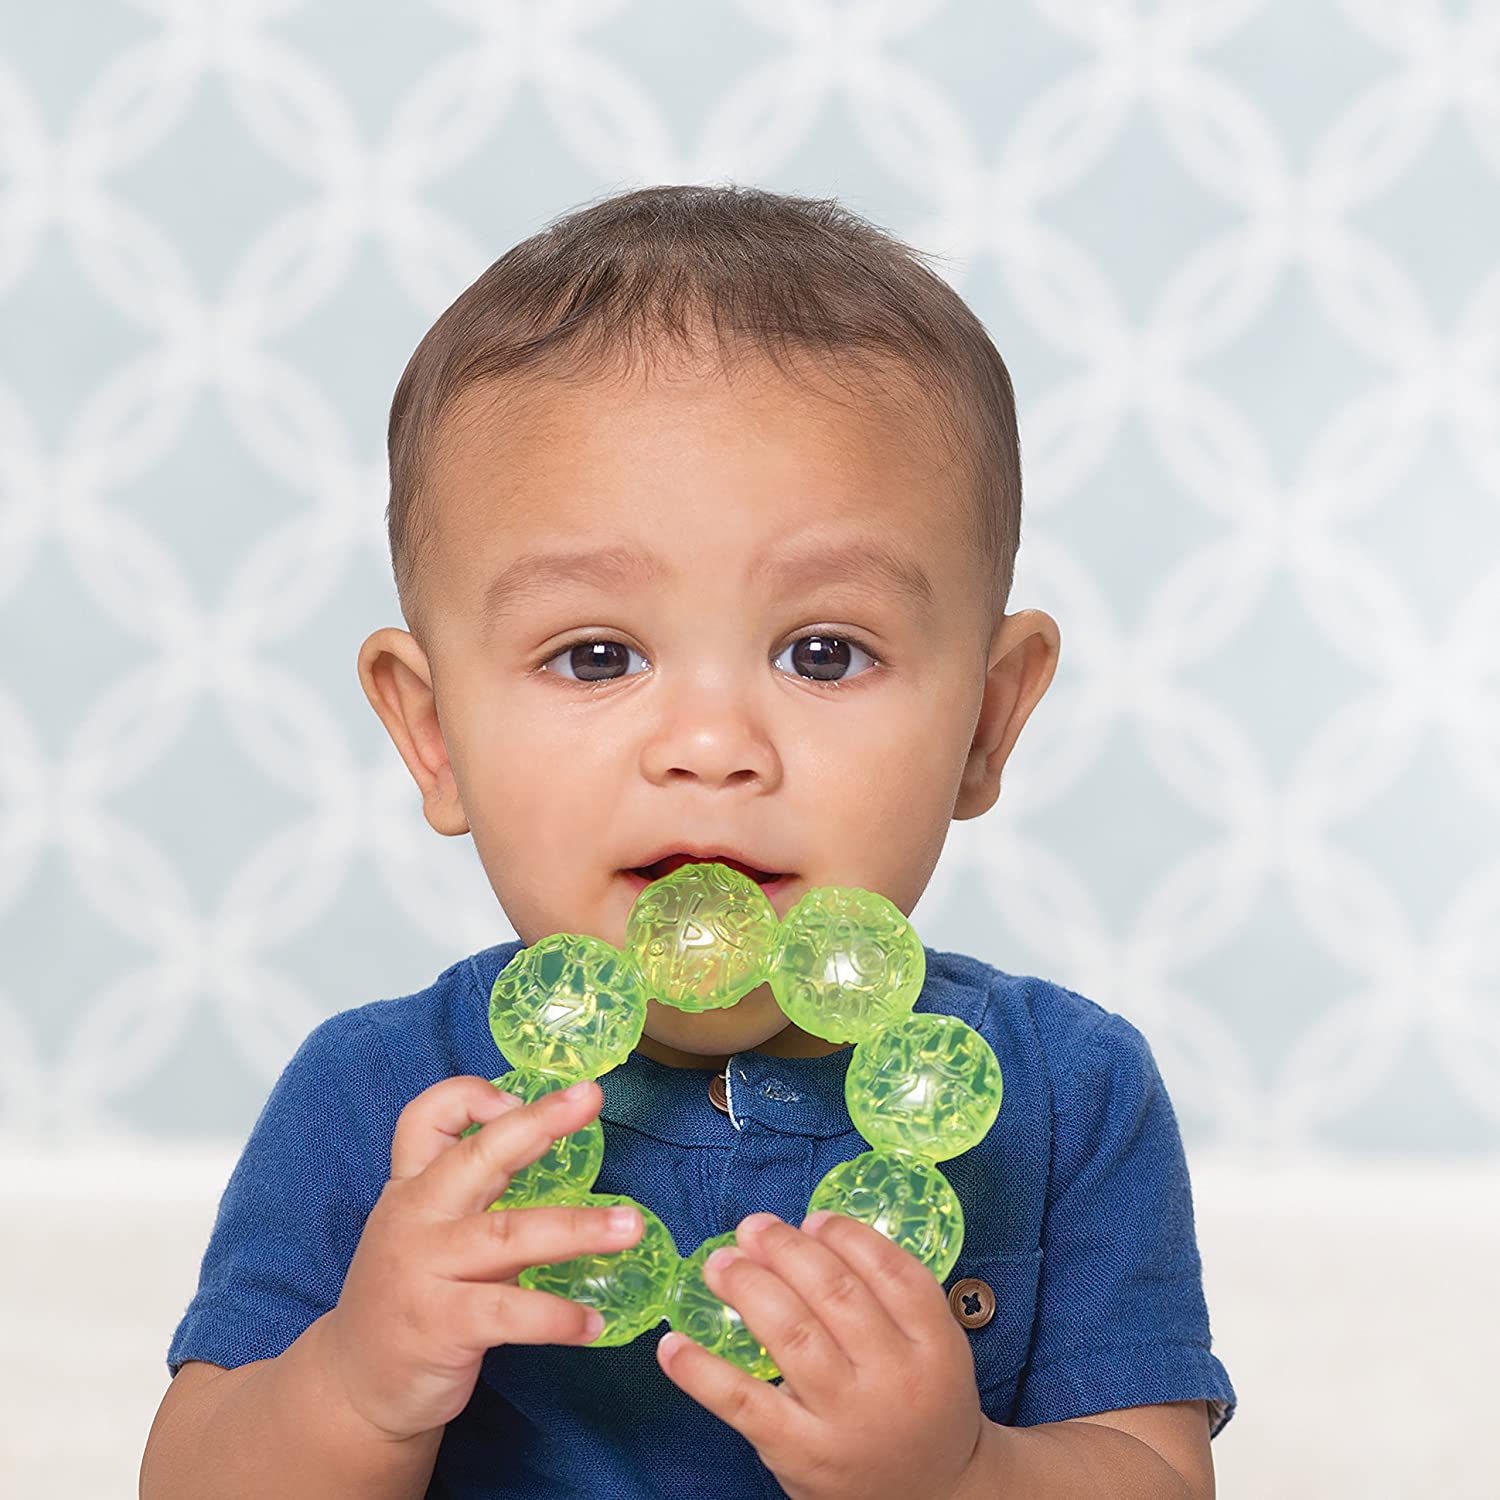 Infantino 3-Pack Water Teethers , Blue and Green , 7 x 2.25 x 8 Inch (Pack of 3)